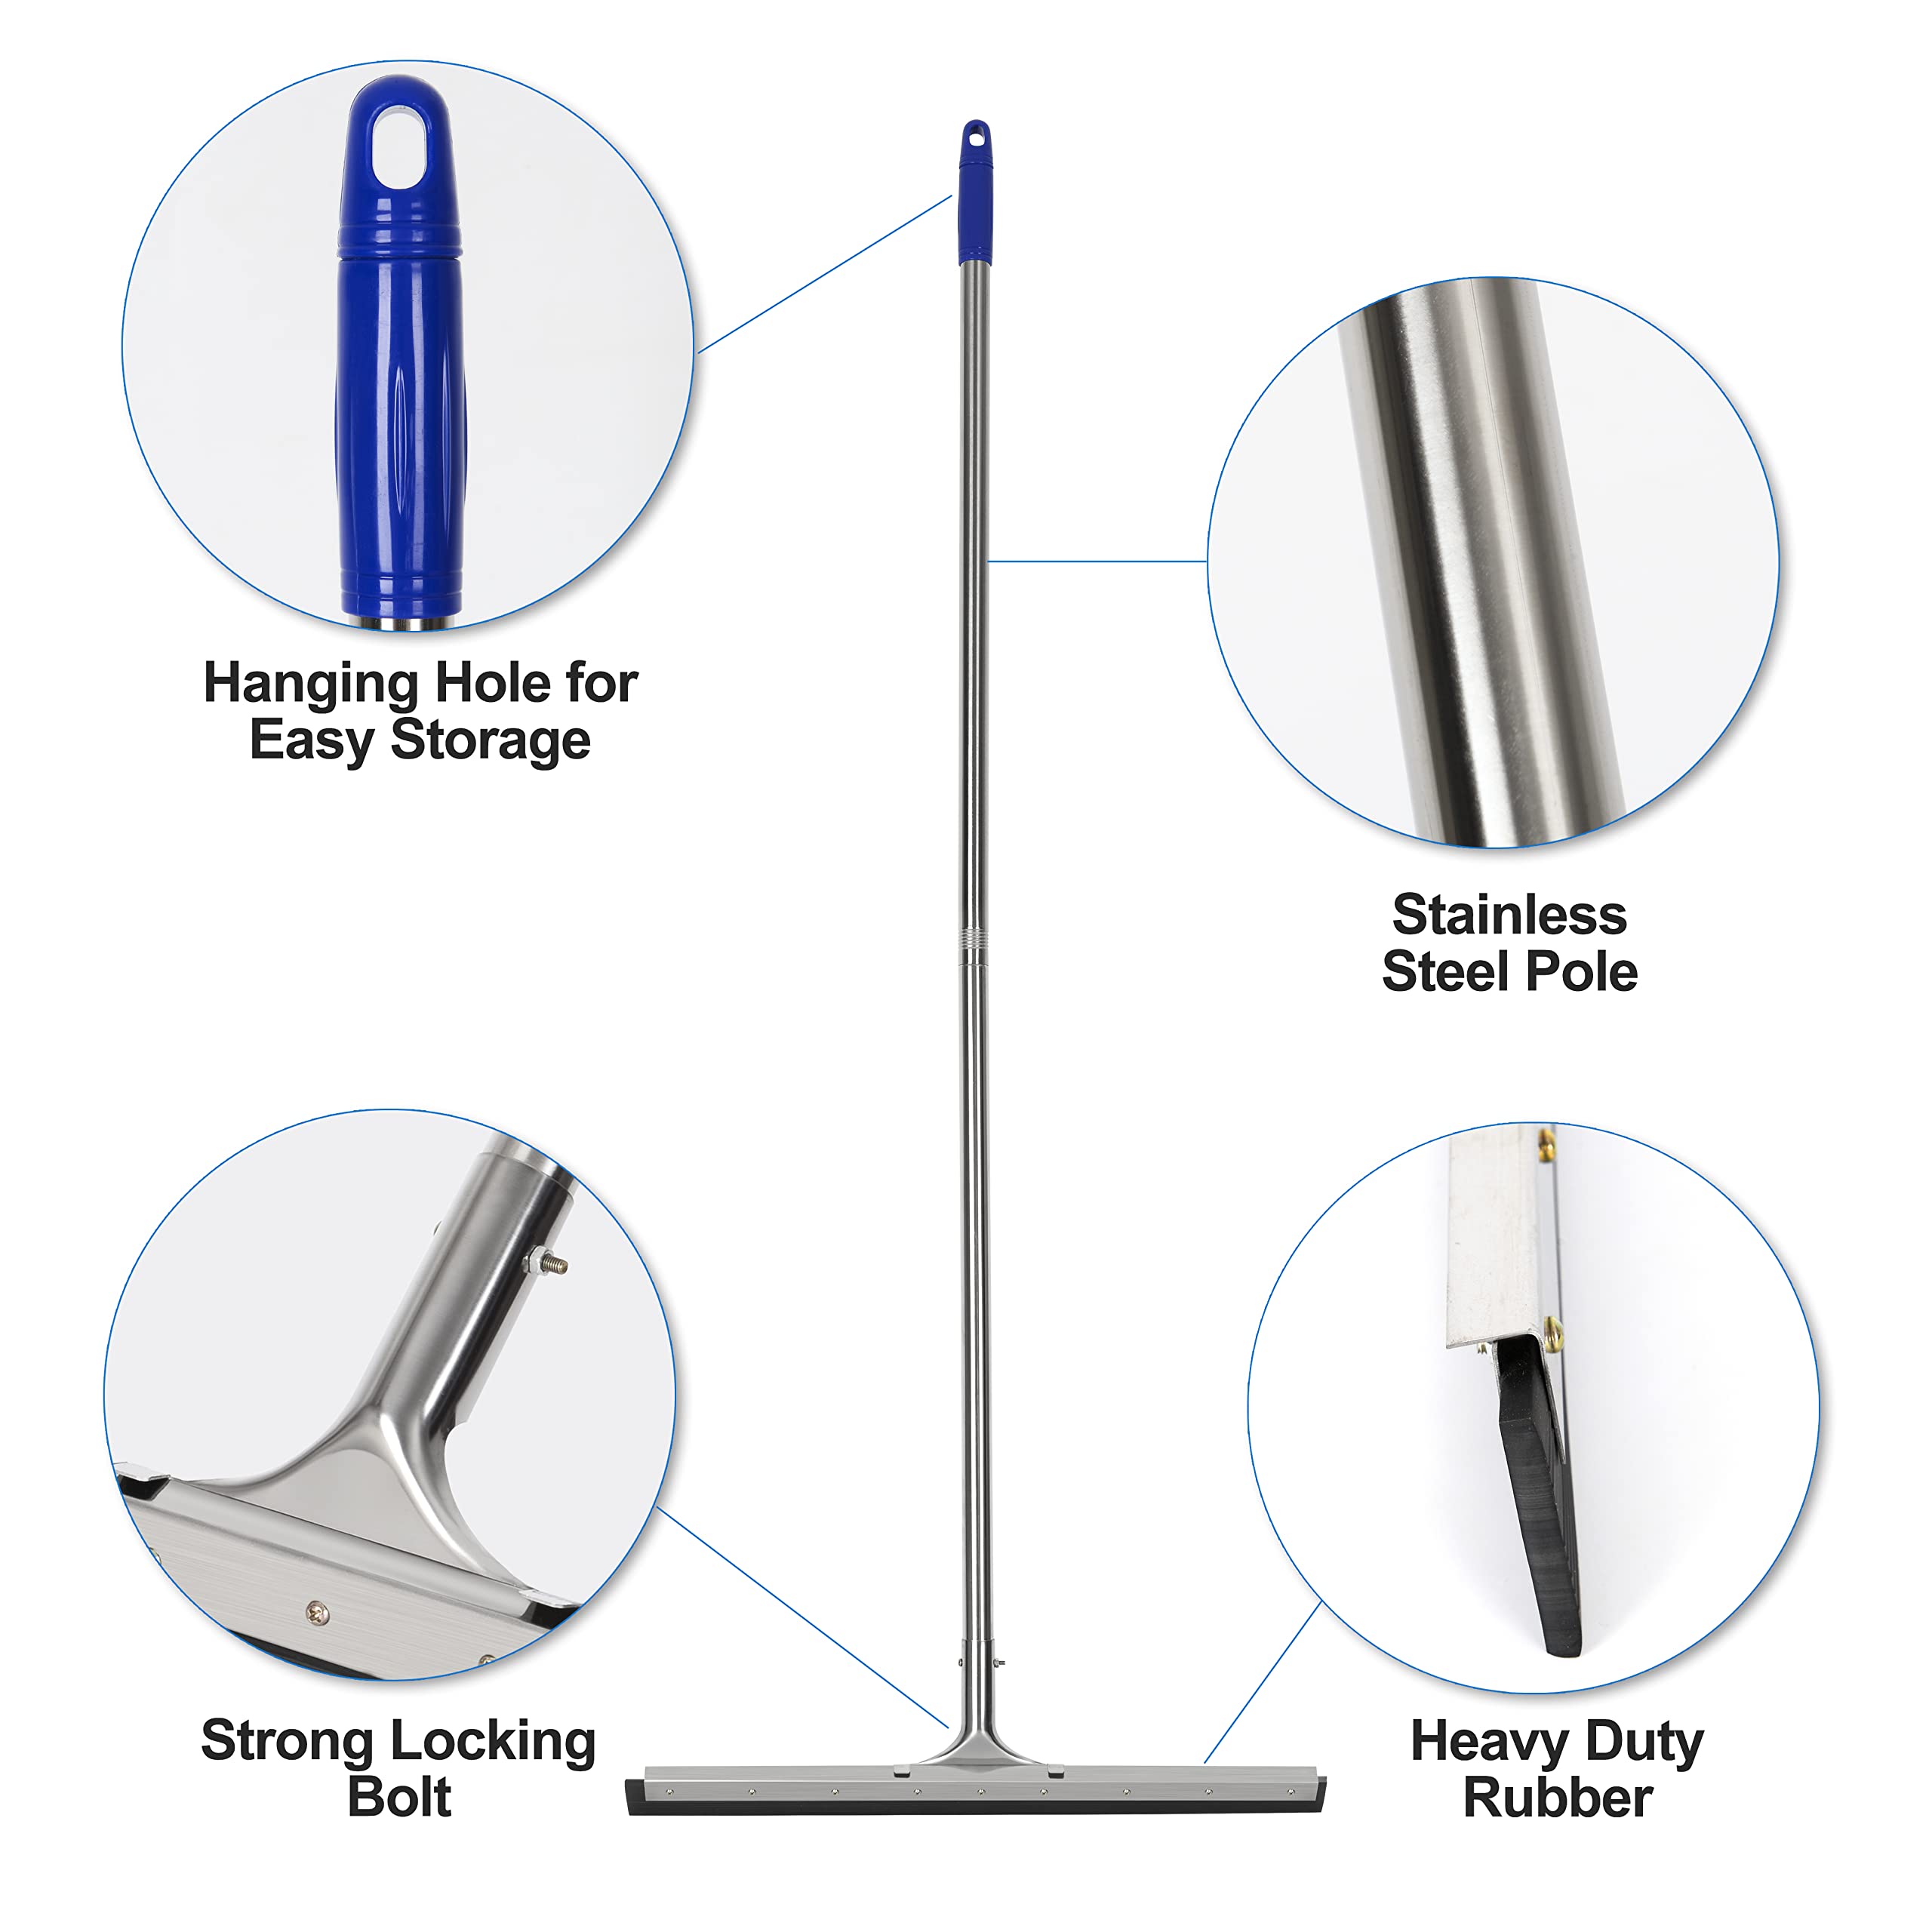 Floor Squeegee Scrubber 55inch Long Stainless Steel Handle with 22inch Wide Silicon Rubber Blade - Perfect Squeegee Broom for Floor Washing and Drying Shower Glass, Marble, Wood Surfaces